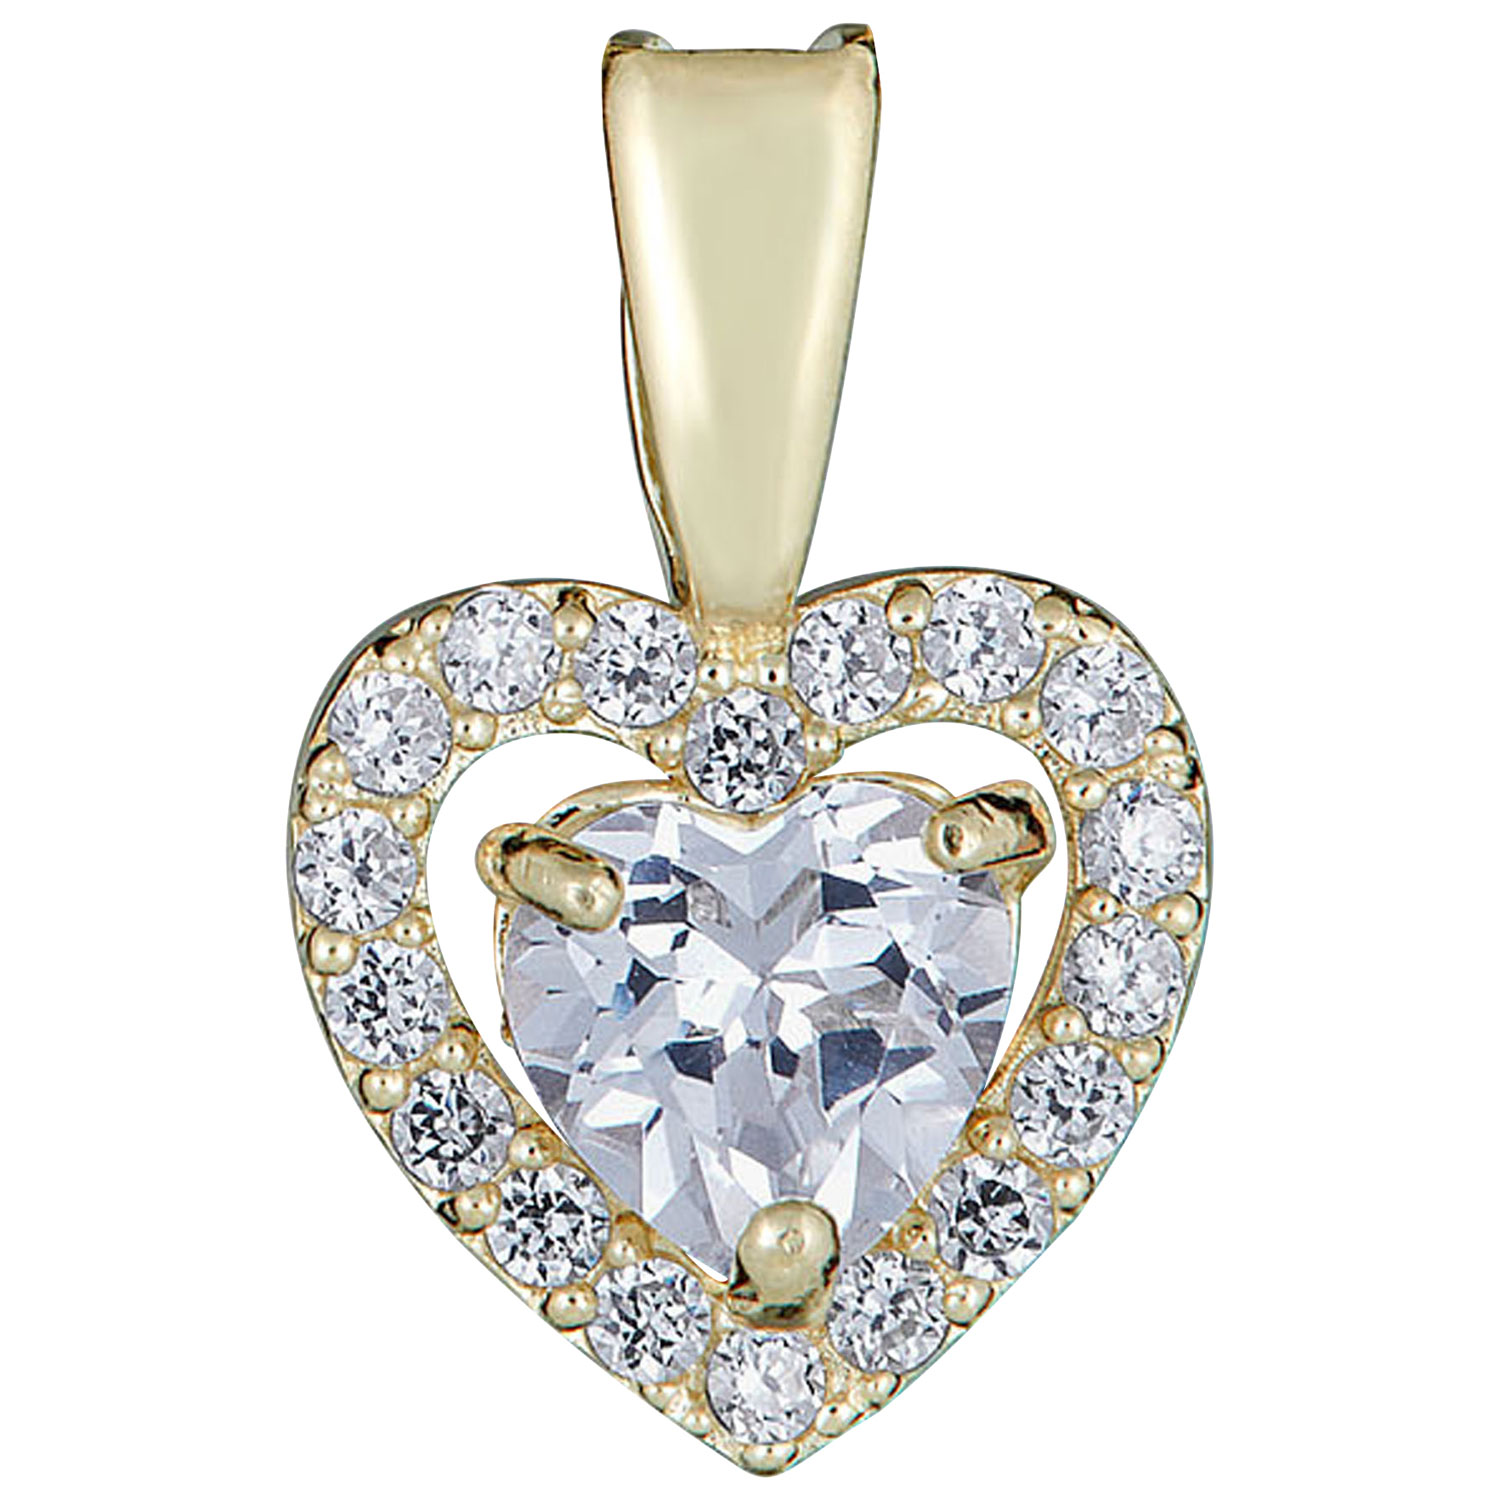 10K Solid Yellow Gold Cubic Zirconia Heart Pendant - Love Necklace Charm